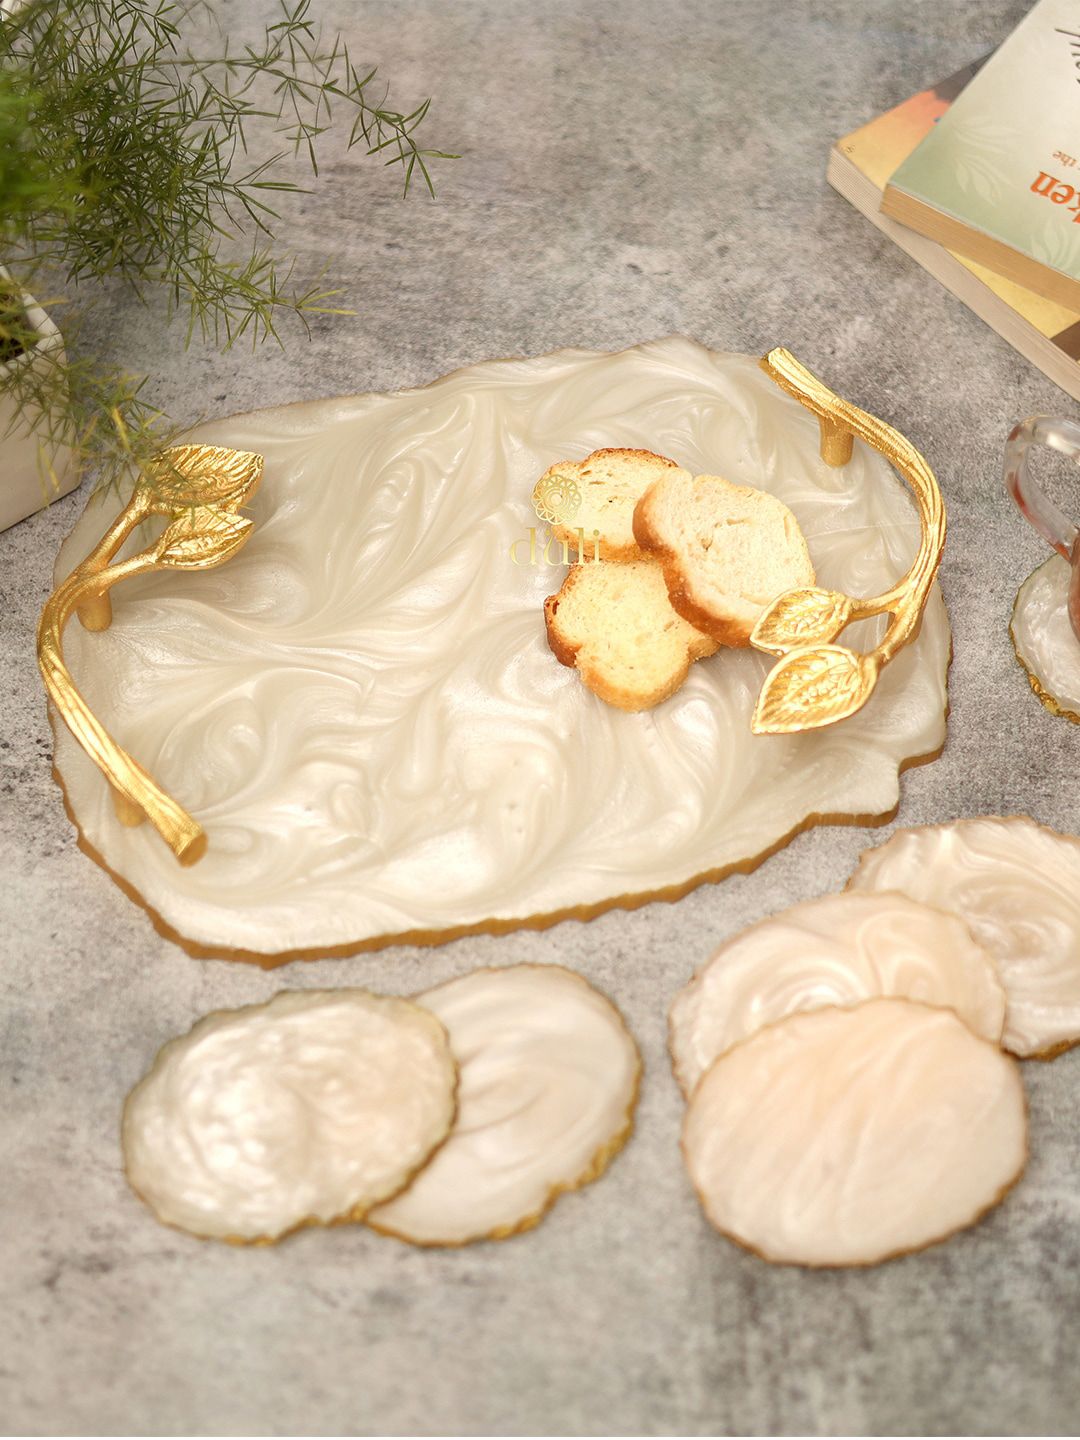 DULI Cream-Colored & Gold-Toned Resin Serving Tray Platter with 6 Pcs Oval Coasters Price in India